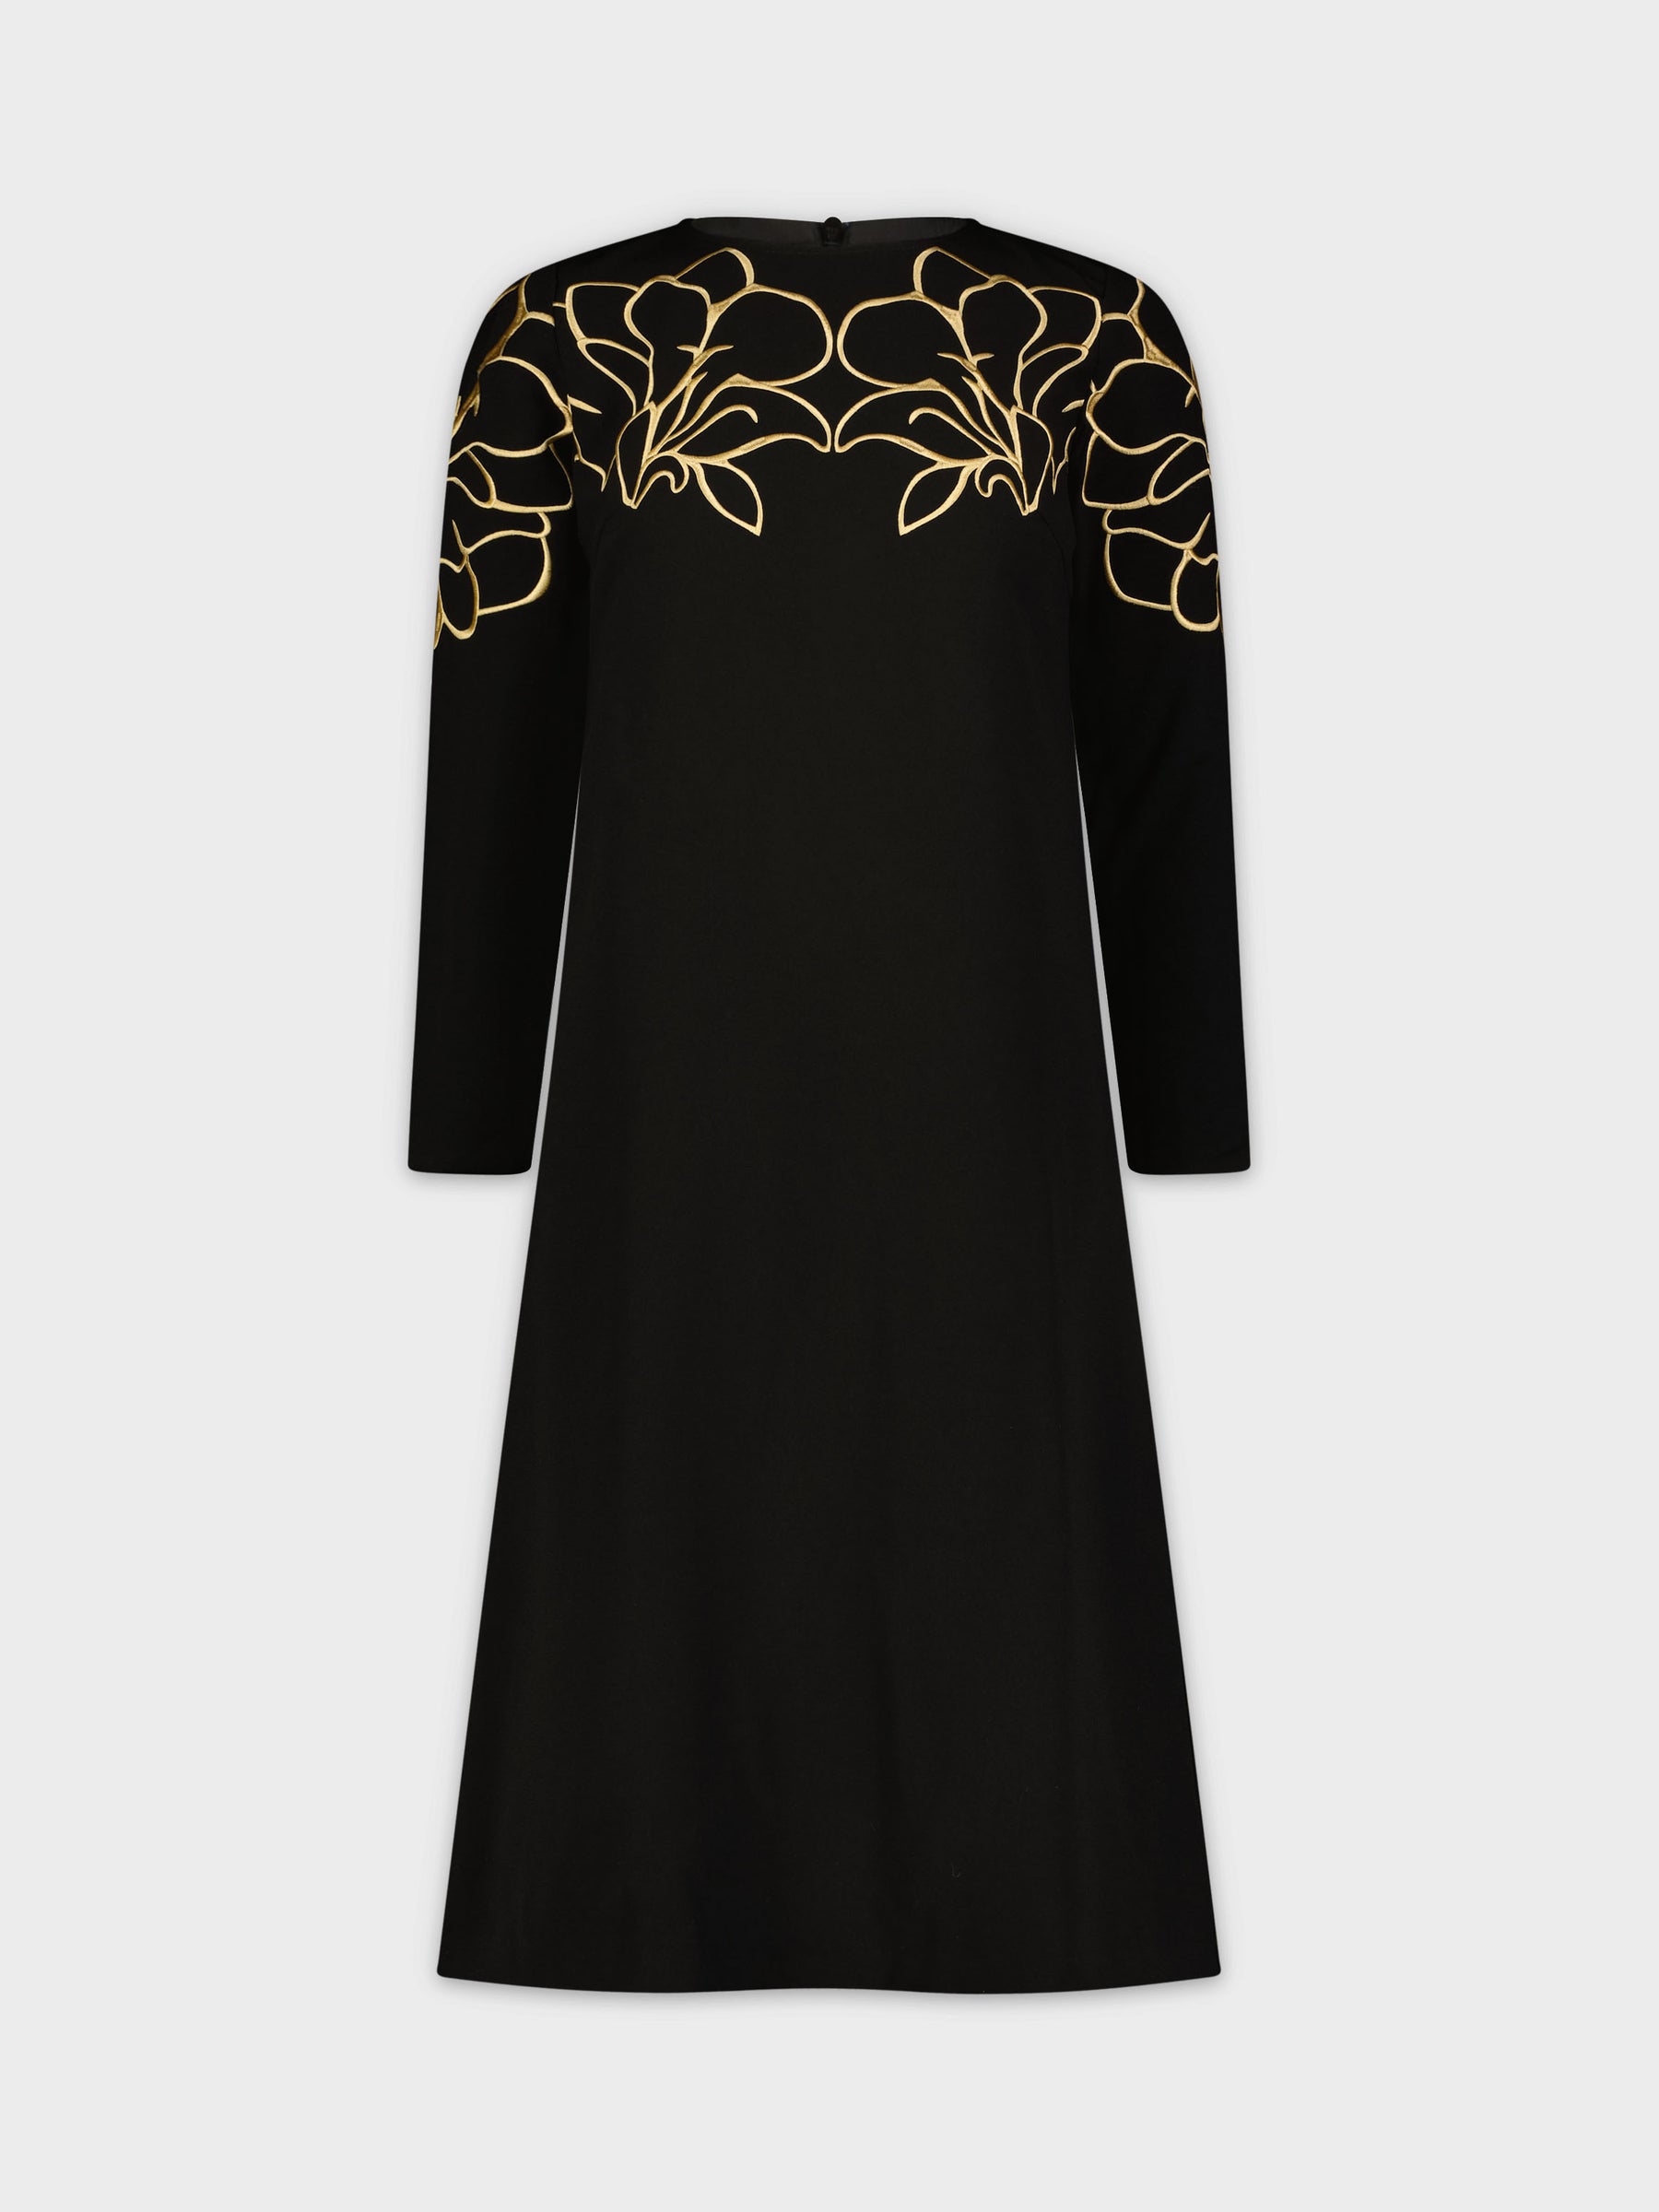 EMBROIDERED SLEEVE DRESS-GOLD FLORAL